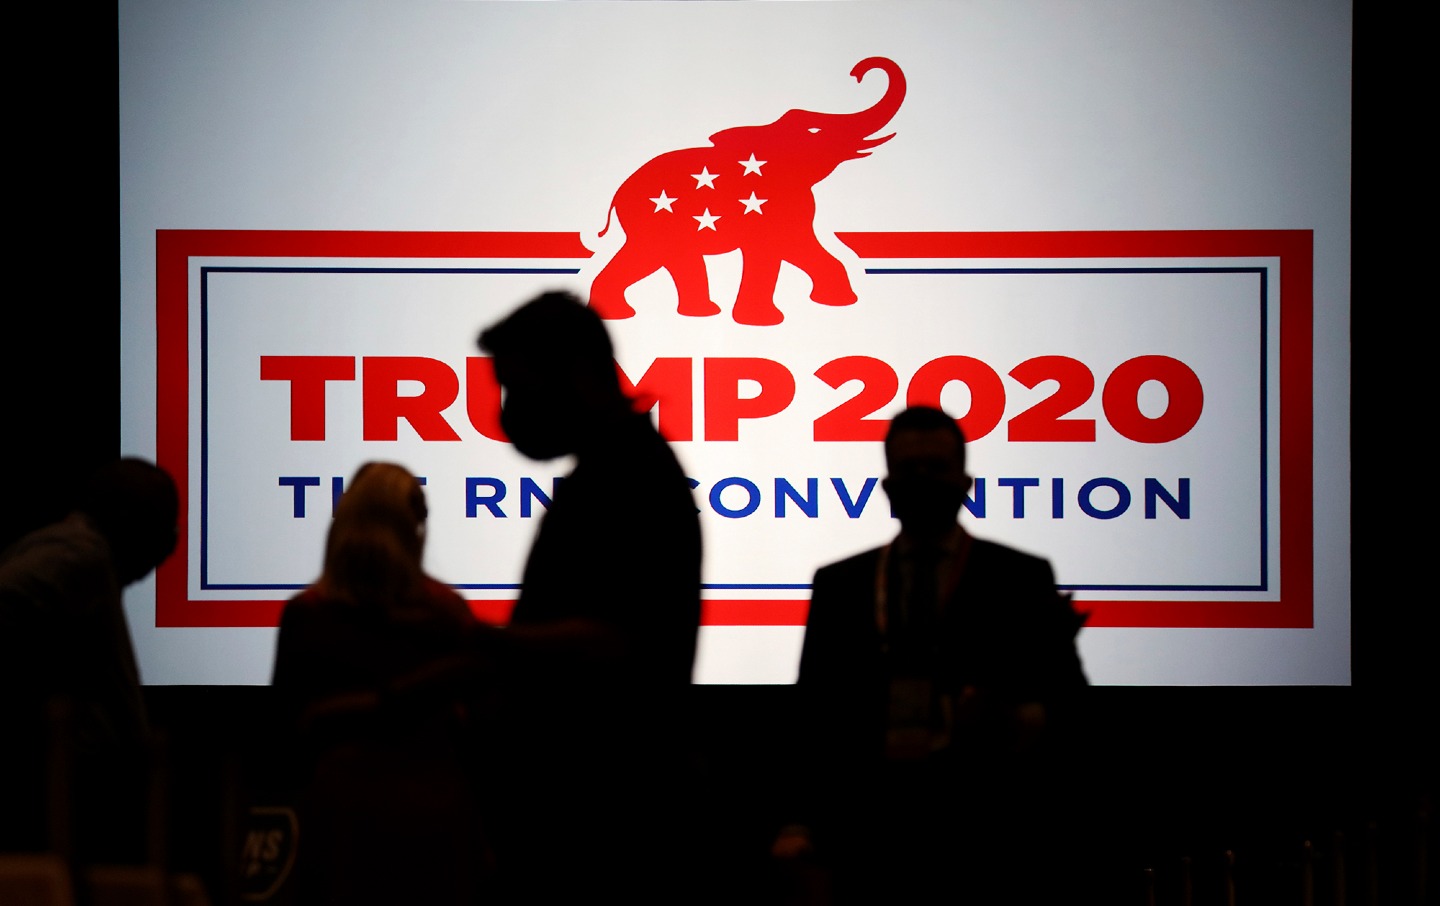 Silhouettes walk past a sign with the RNC logo and reads 